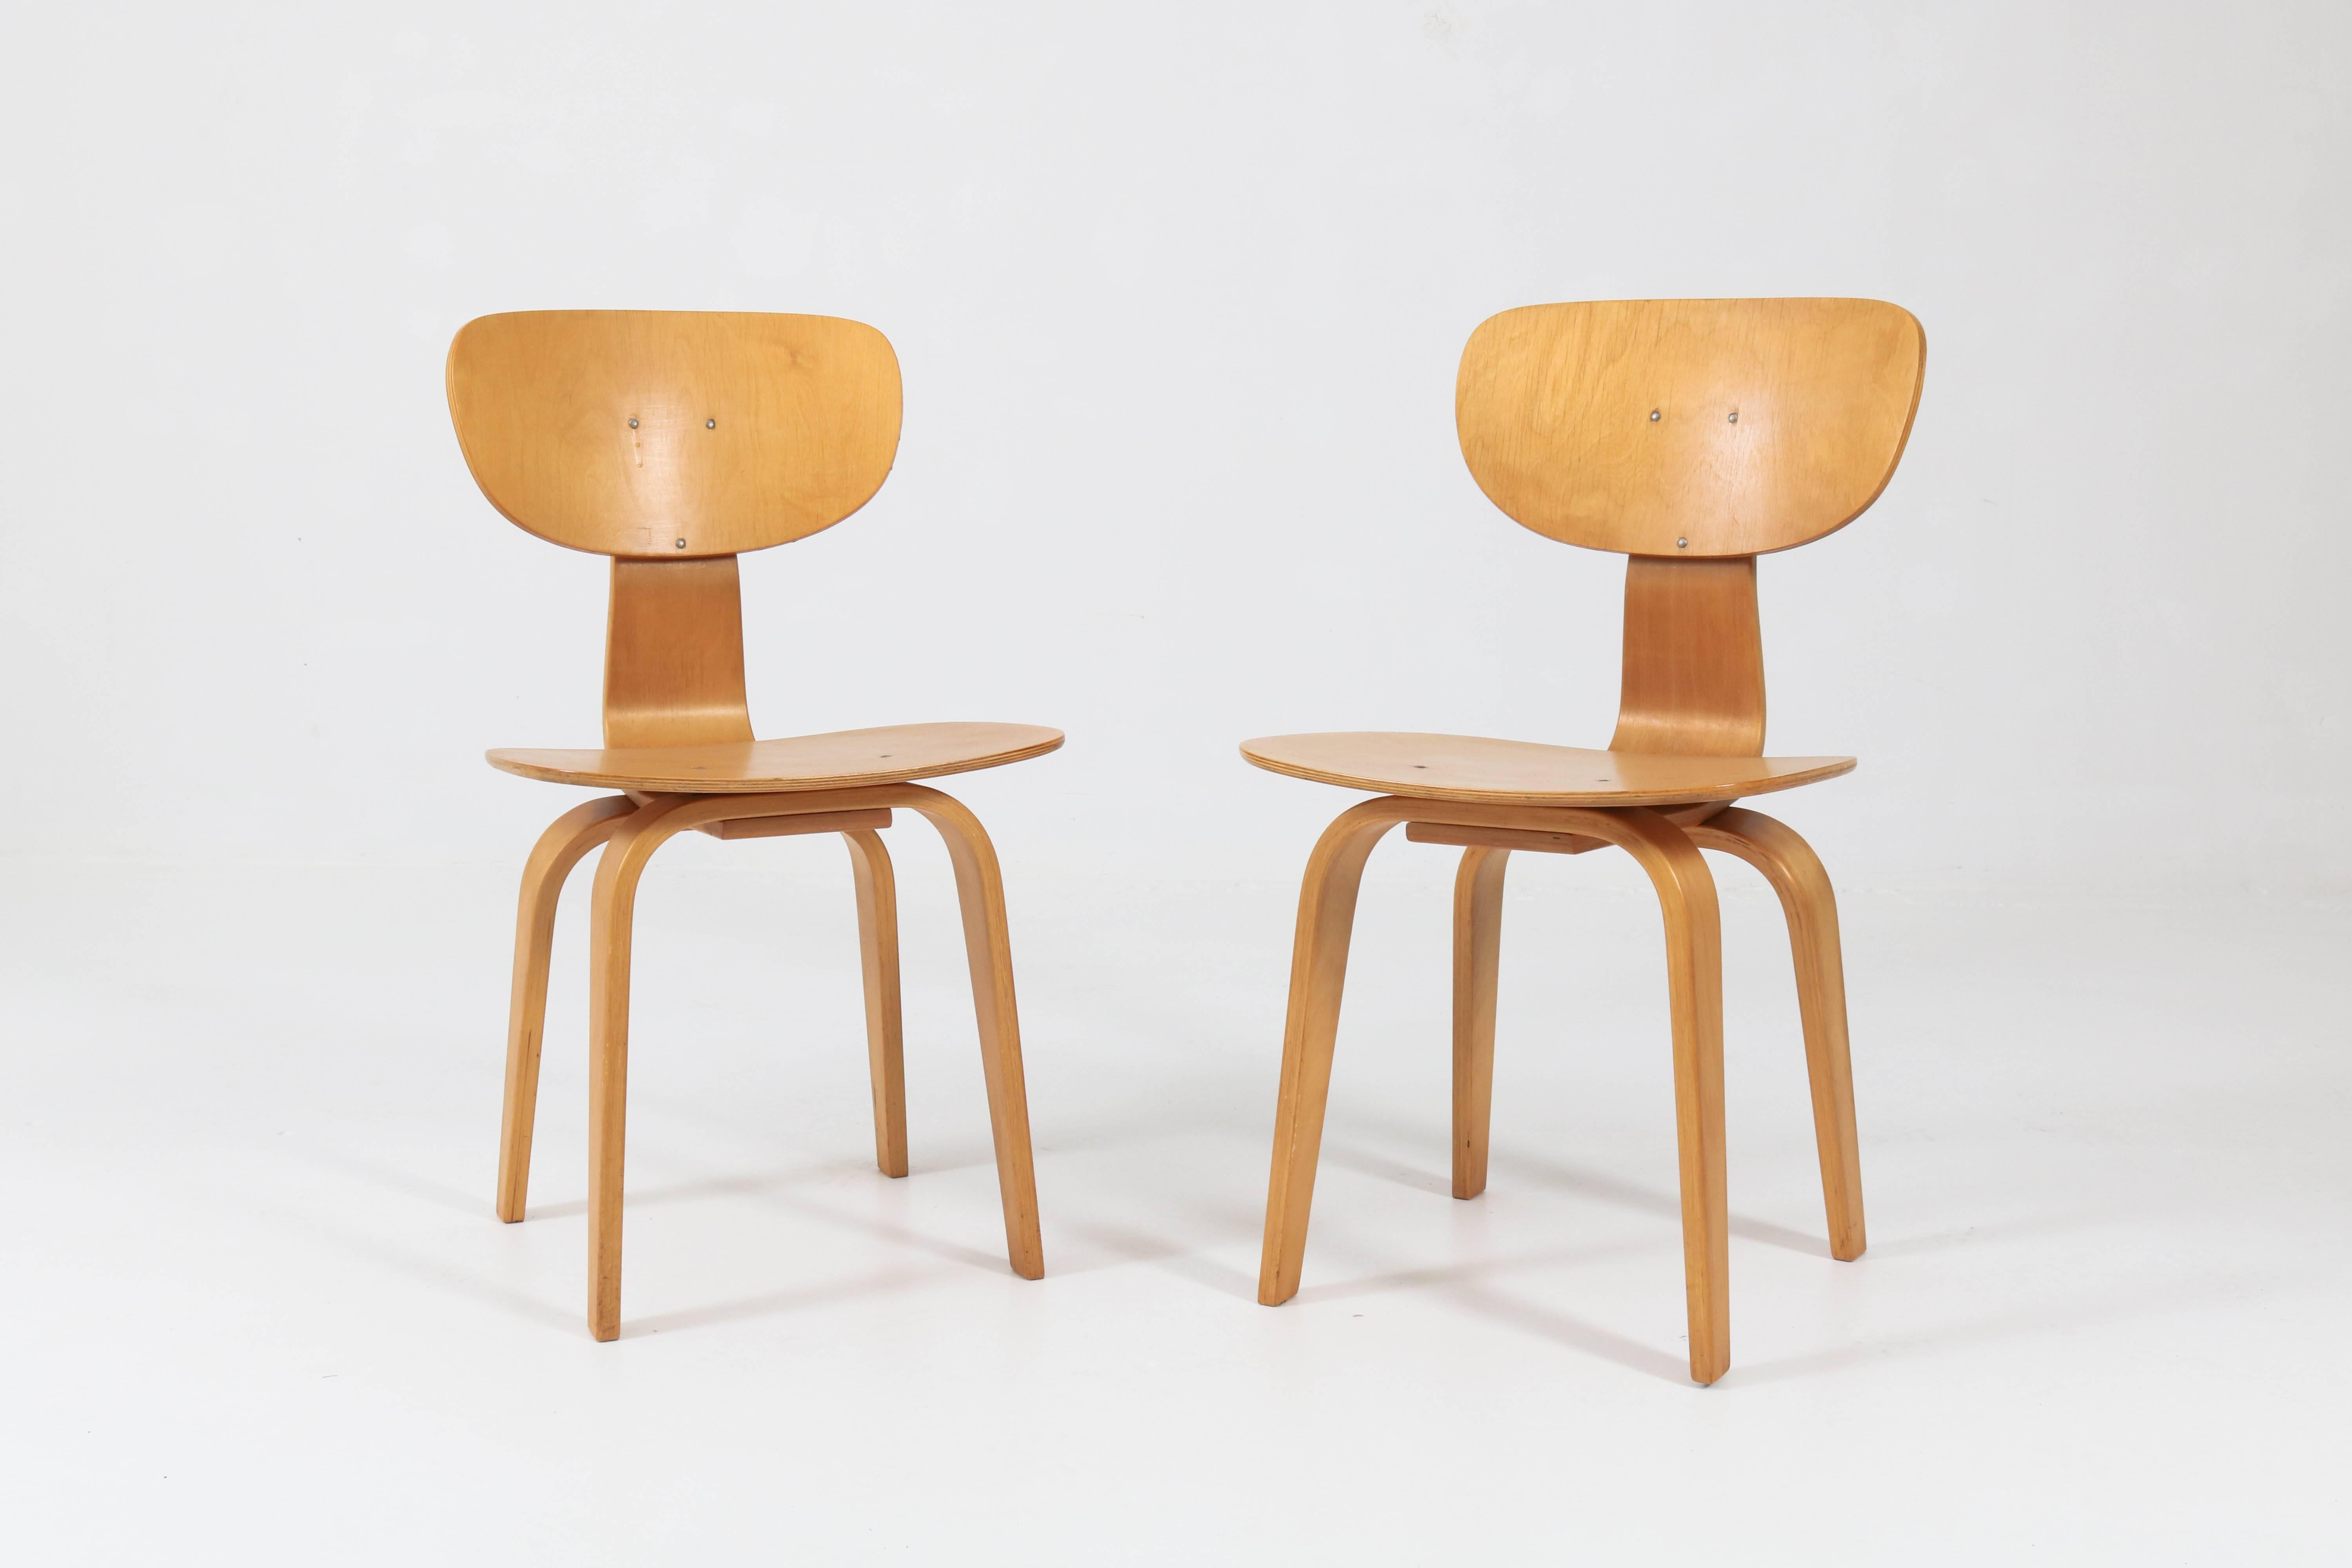 Pair of Mid-Century Modern SB02 Combex series chairs by Cees Braakman for Pastoe, 1950s
Birch and plywood.
In very condition with minor wear consistent with age and use,
preserving a beautiful patina.
   